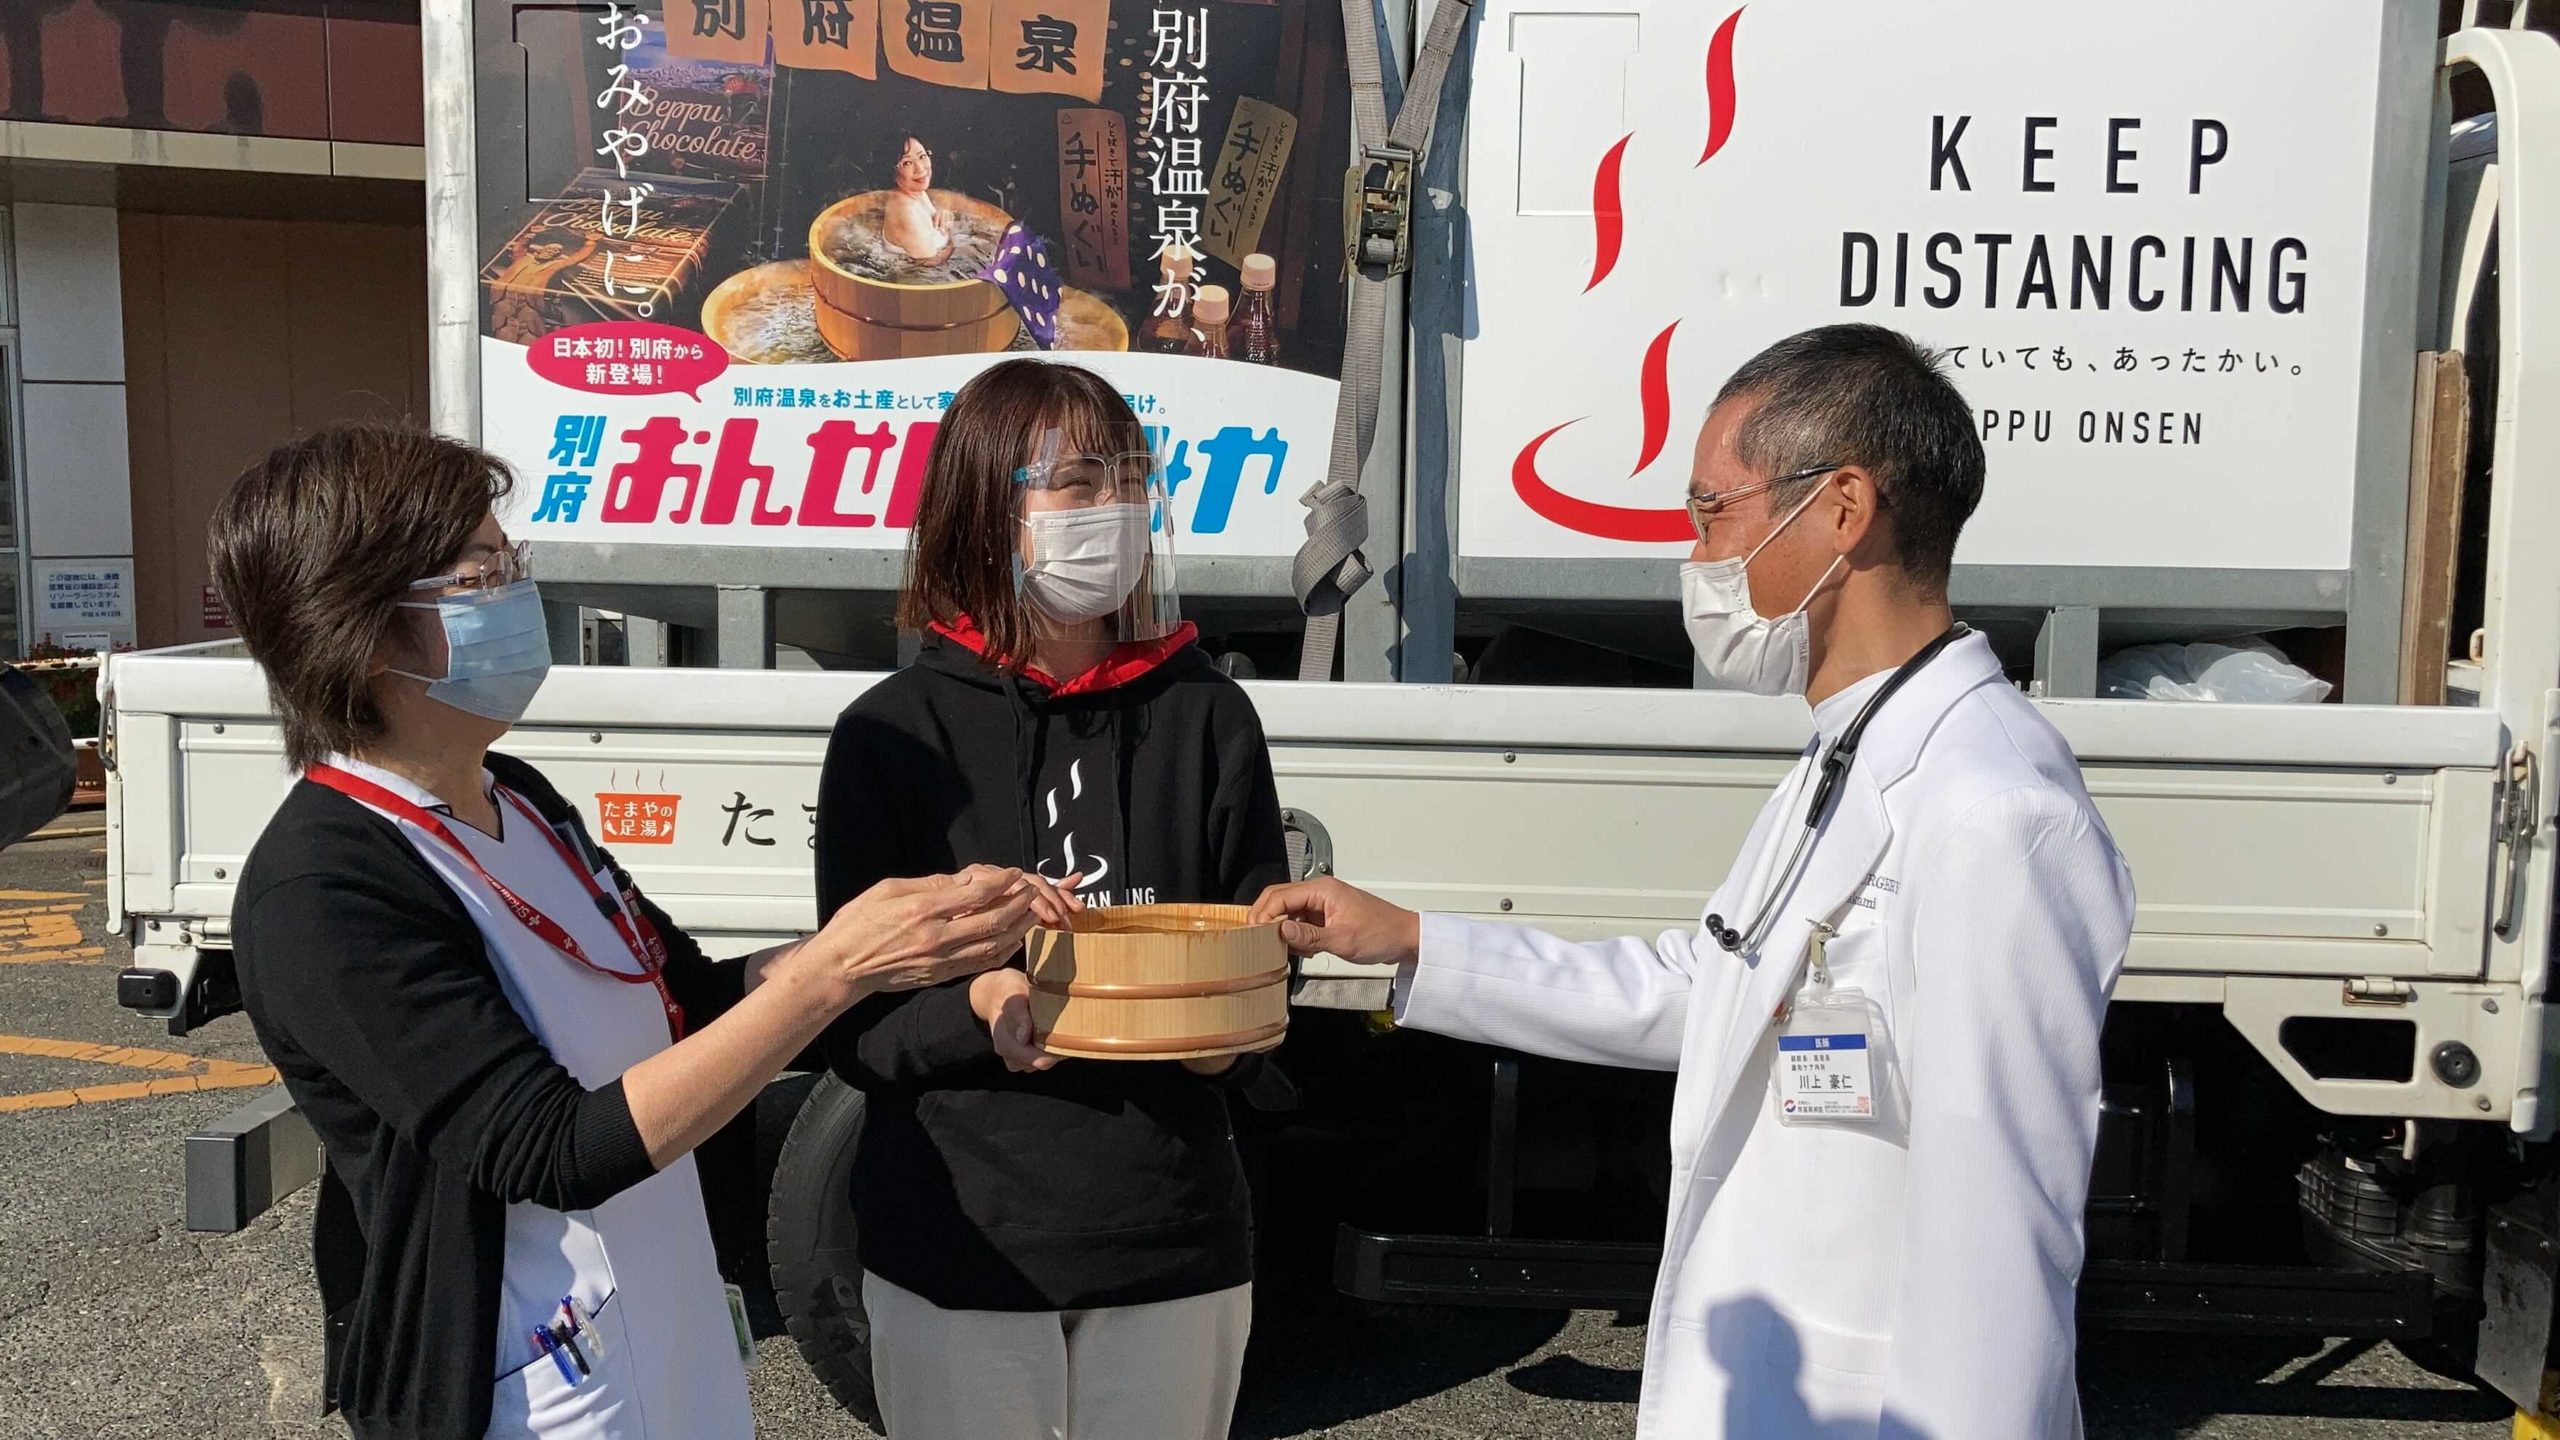 “Expressing the heart of gratitude to people through Hot spring” Students at Ritsumeikan Asia Pacific University deliver Beppu hot springs to Covid-19 medical workers.